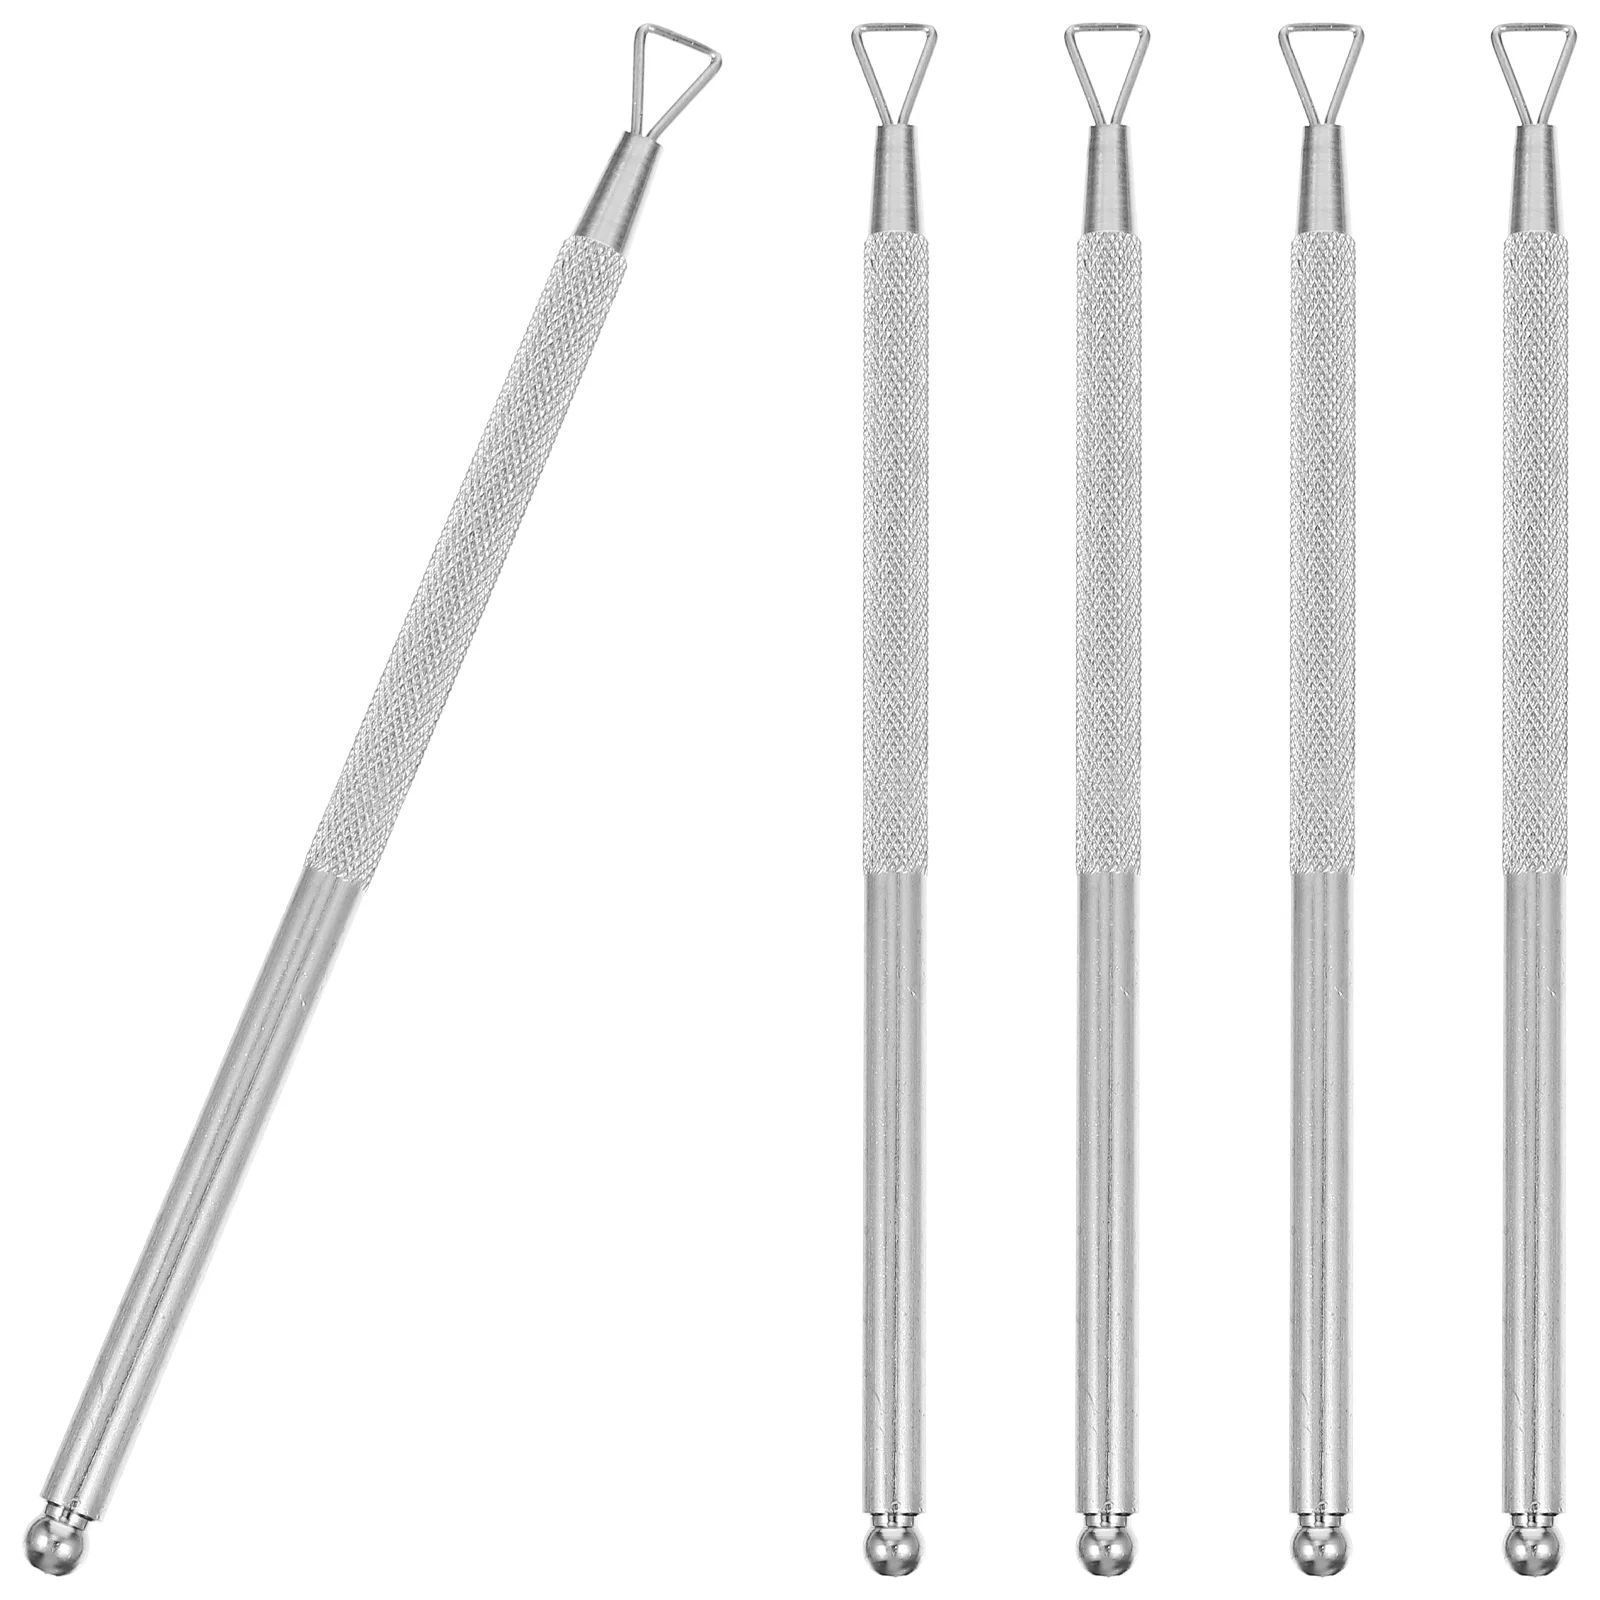 

Nail Cuticle Remover Pusher Polish Tool Scraper Manicure Peeler Tickets Lottery Off Scratch Practical Dip Tools Pedicure Steel